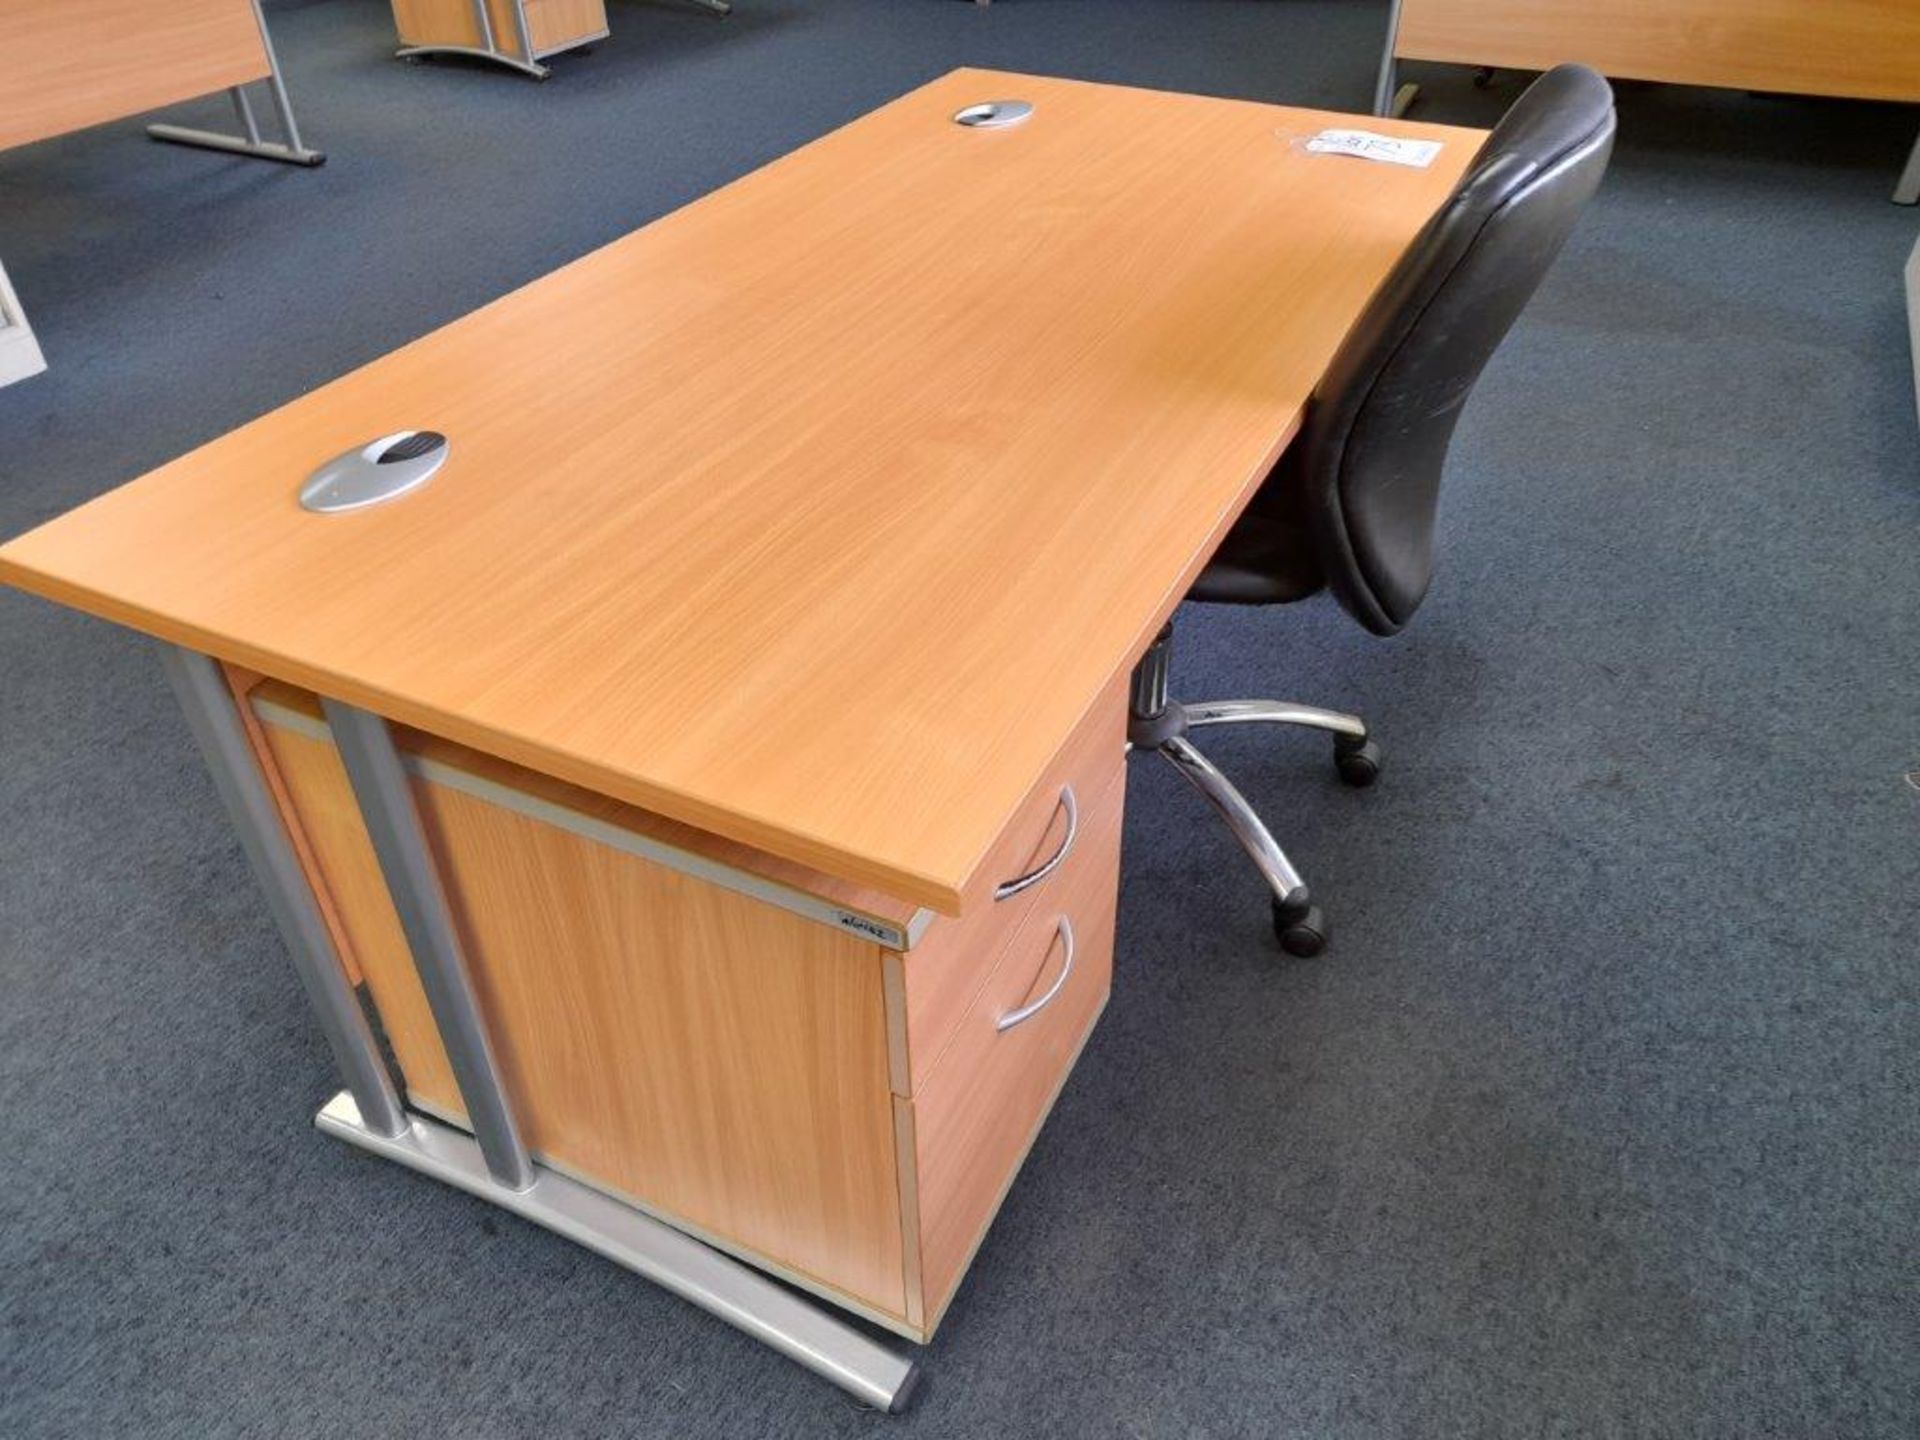 2 x light oak veneeered desks each with pedestal unit and 2 assorted swivel chairs - Image 2 of 3